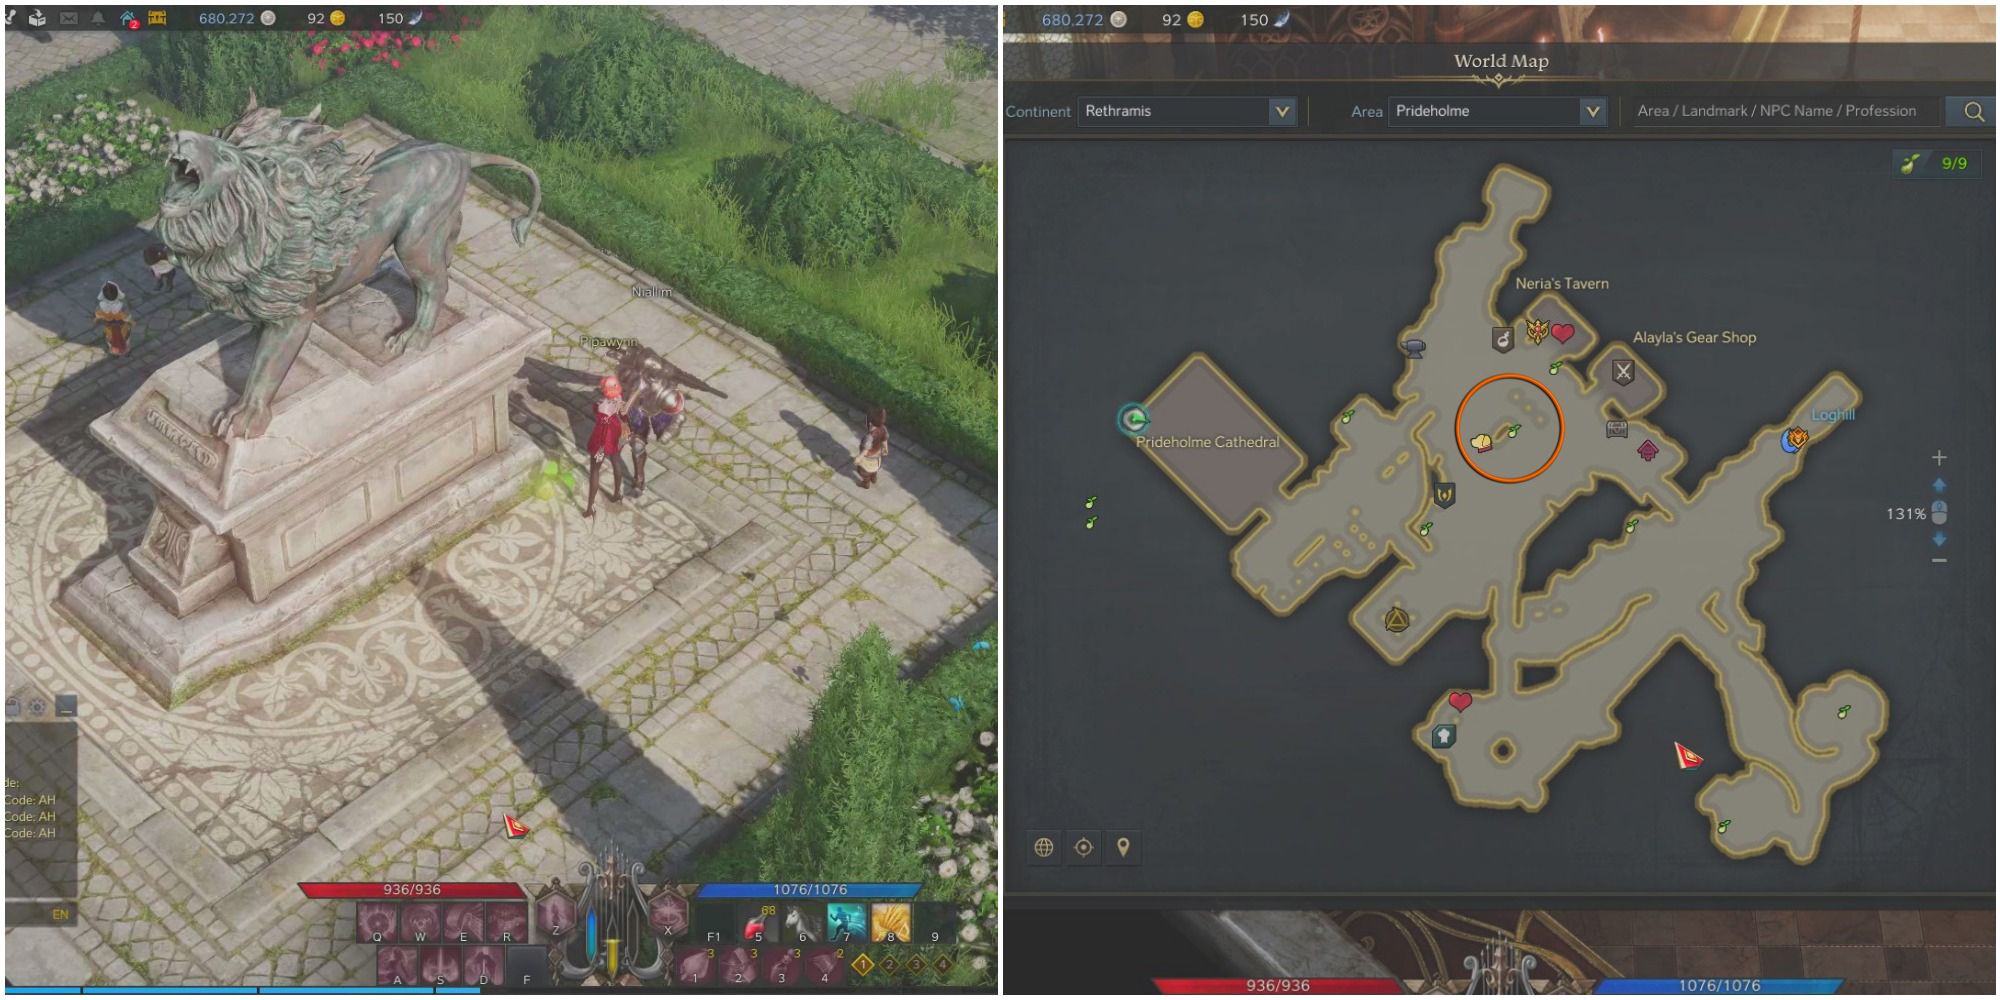 A split image of a bard standing beside a mokoko seed beside a lion statue and a map of Prideholme